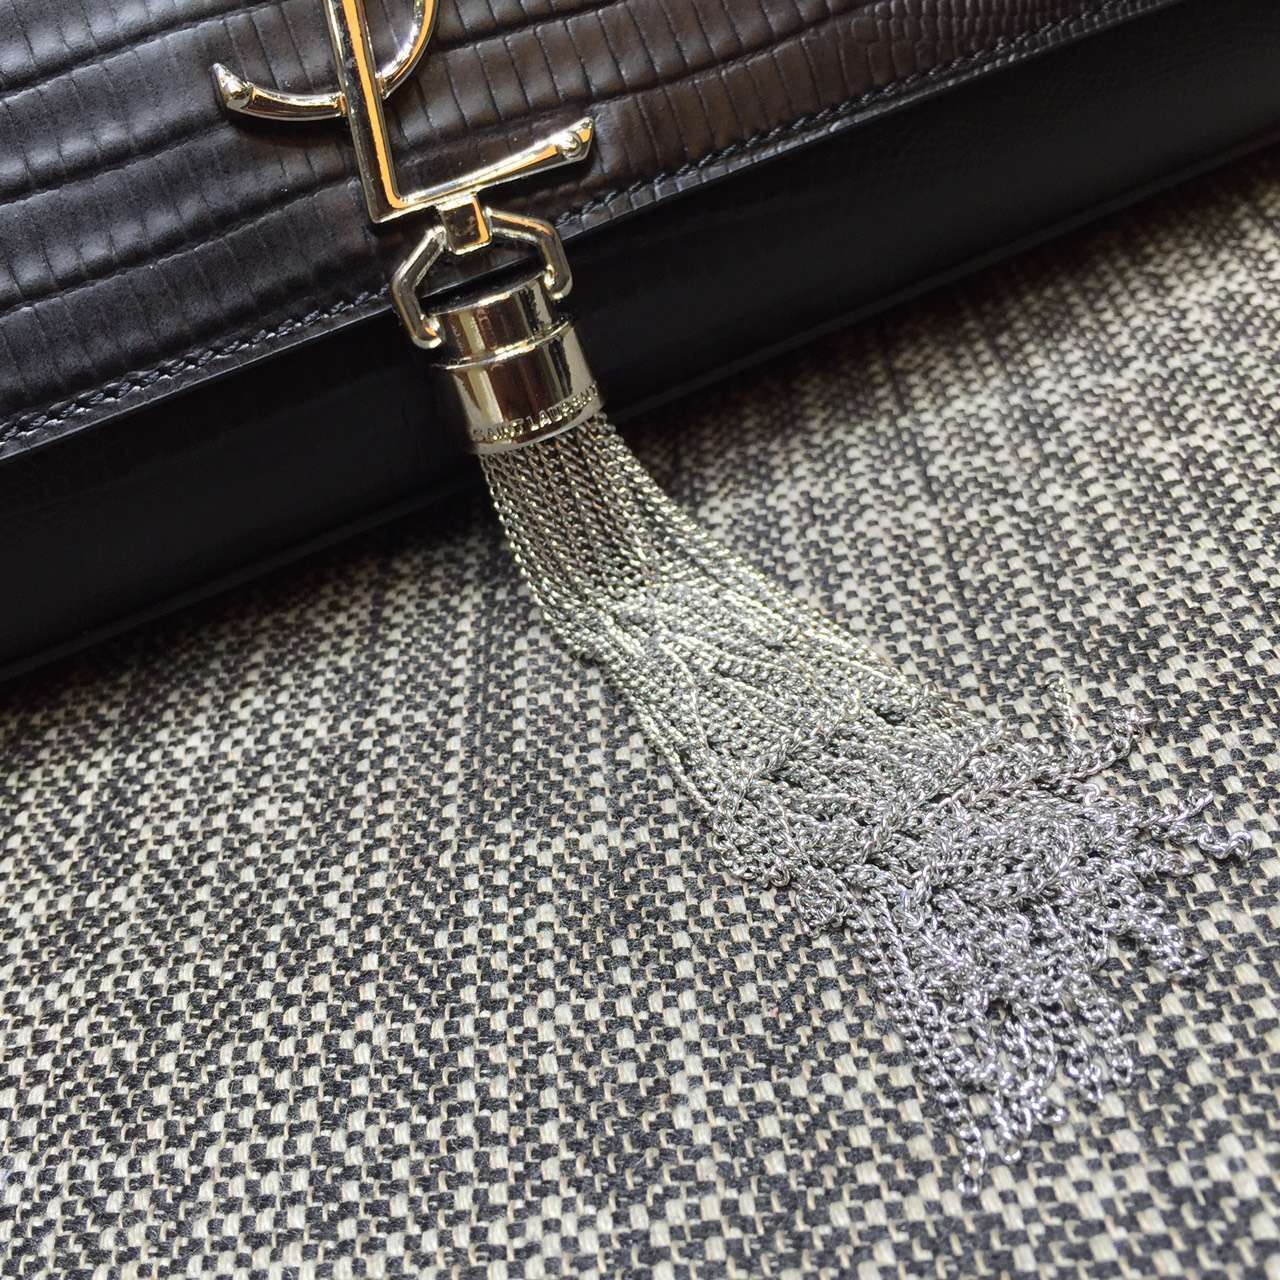 2015 New YSL Bag Cheap Sale-Saint Laurent Classic Monogram Tassel Clutch in Black Lizard Embossed Leather - Click Image to Close